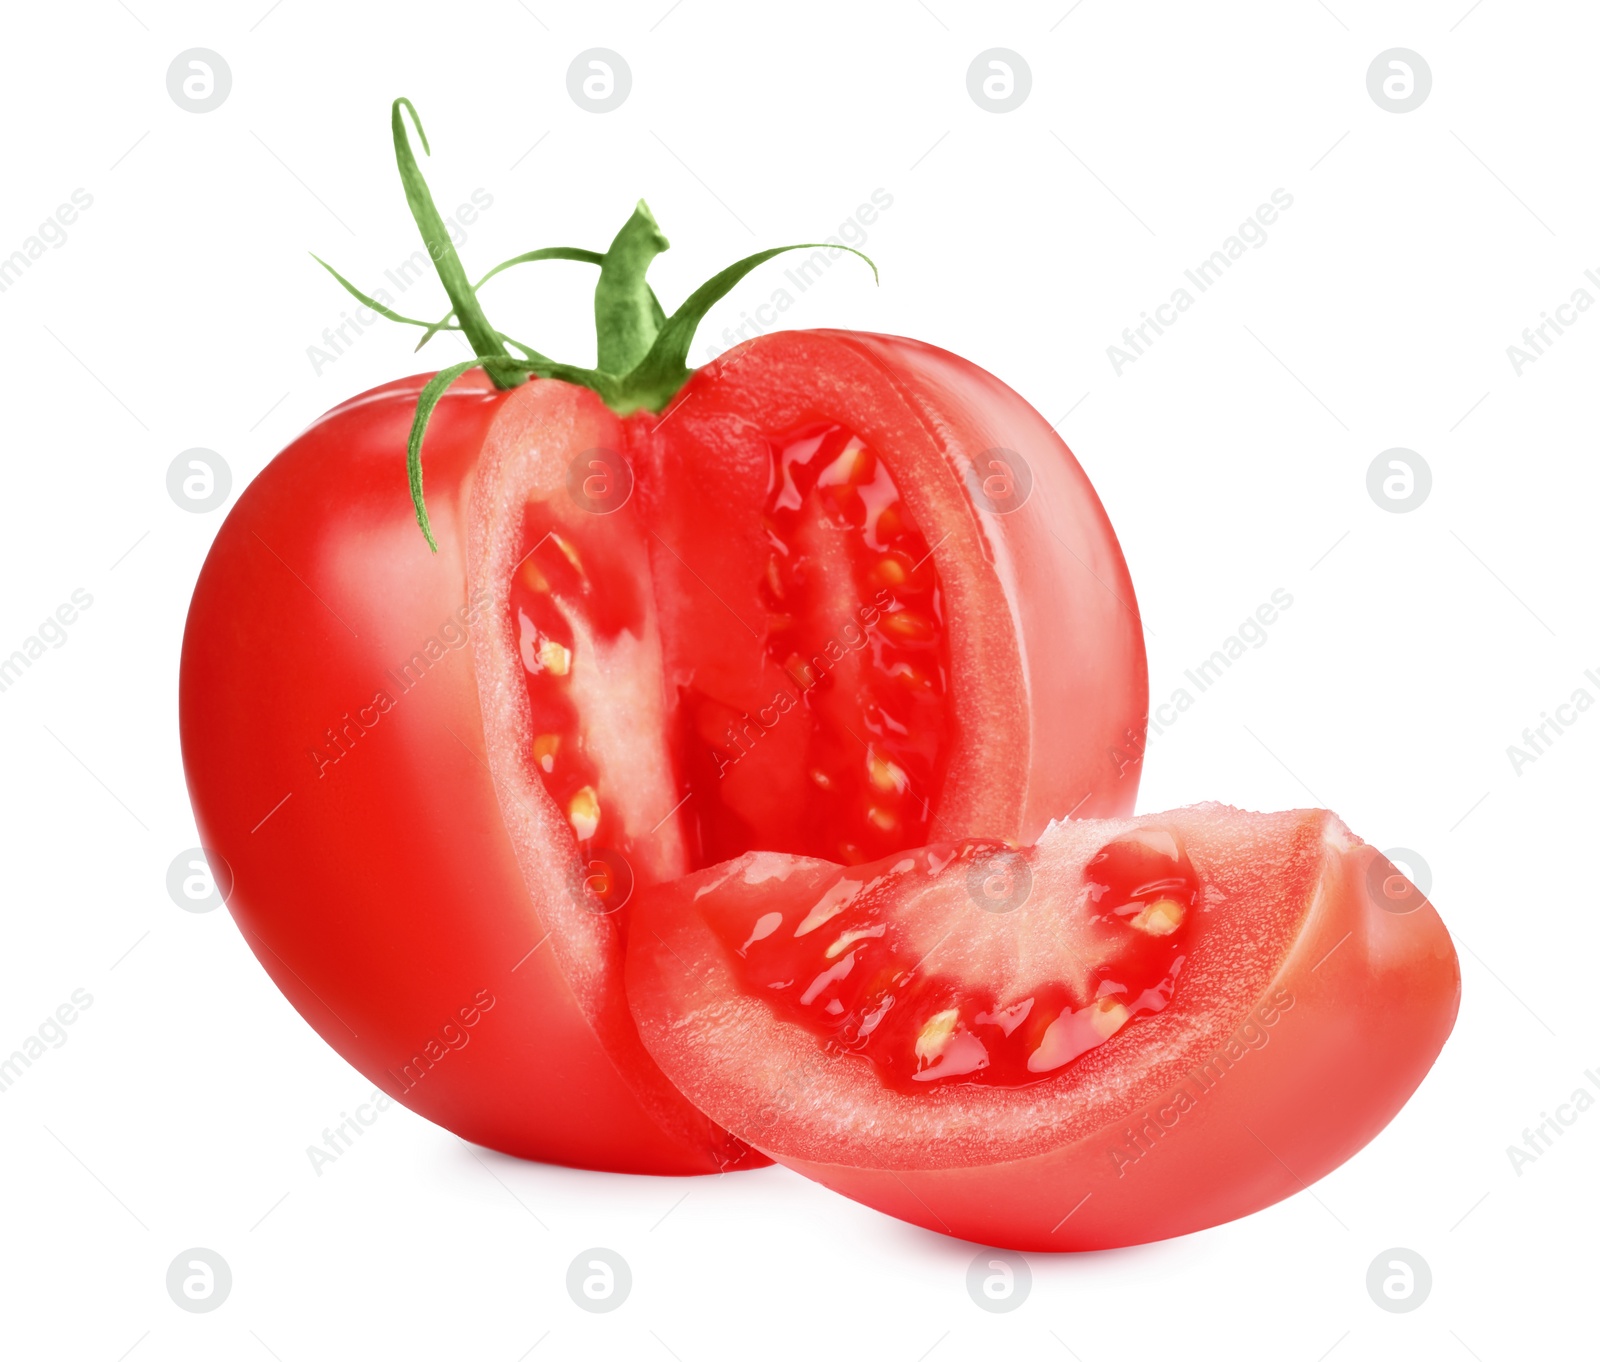 Photo of Cut red ripe tomato isolated on white